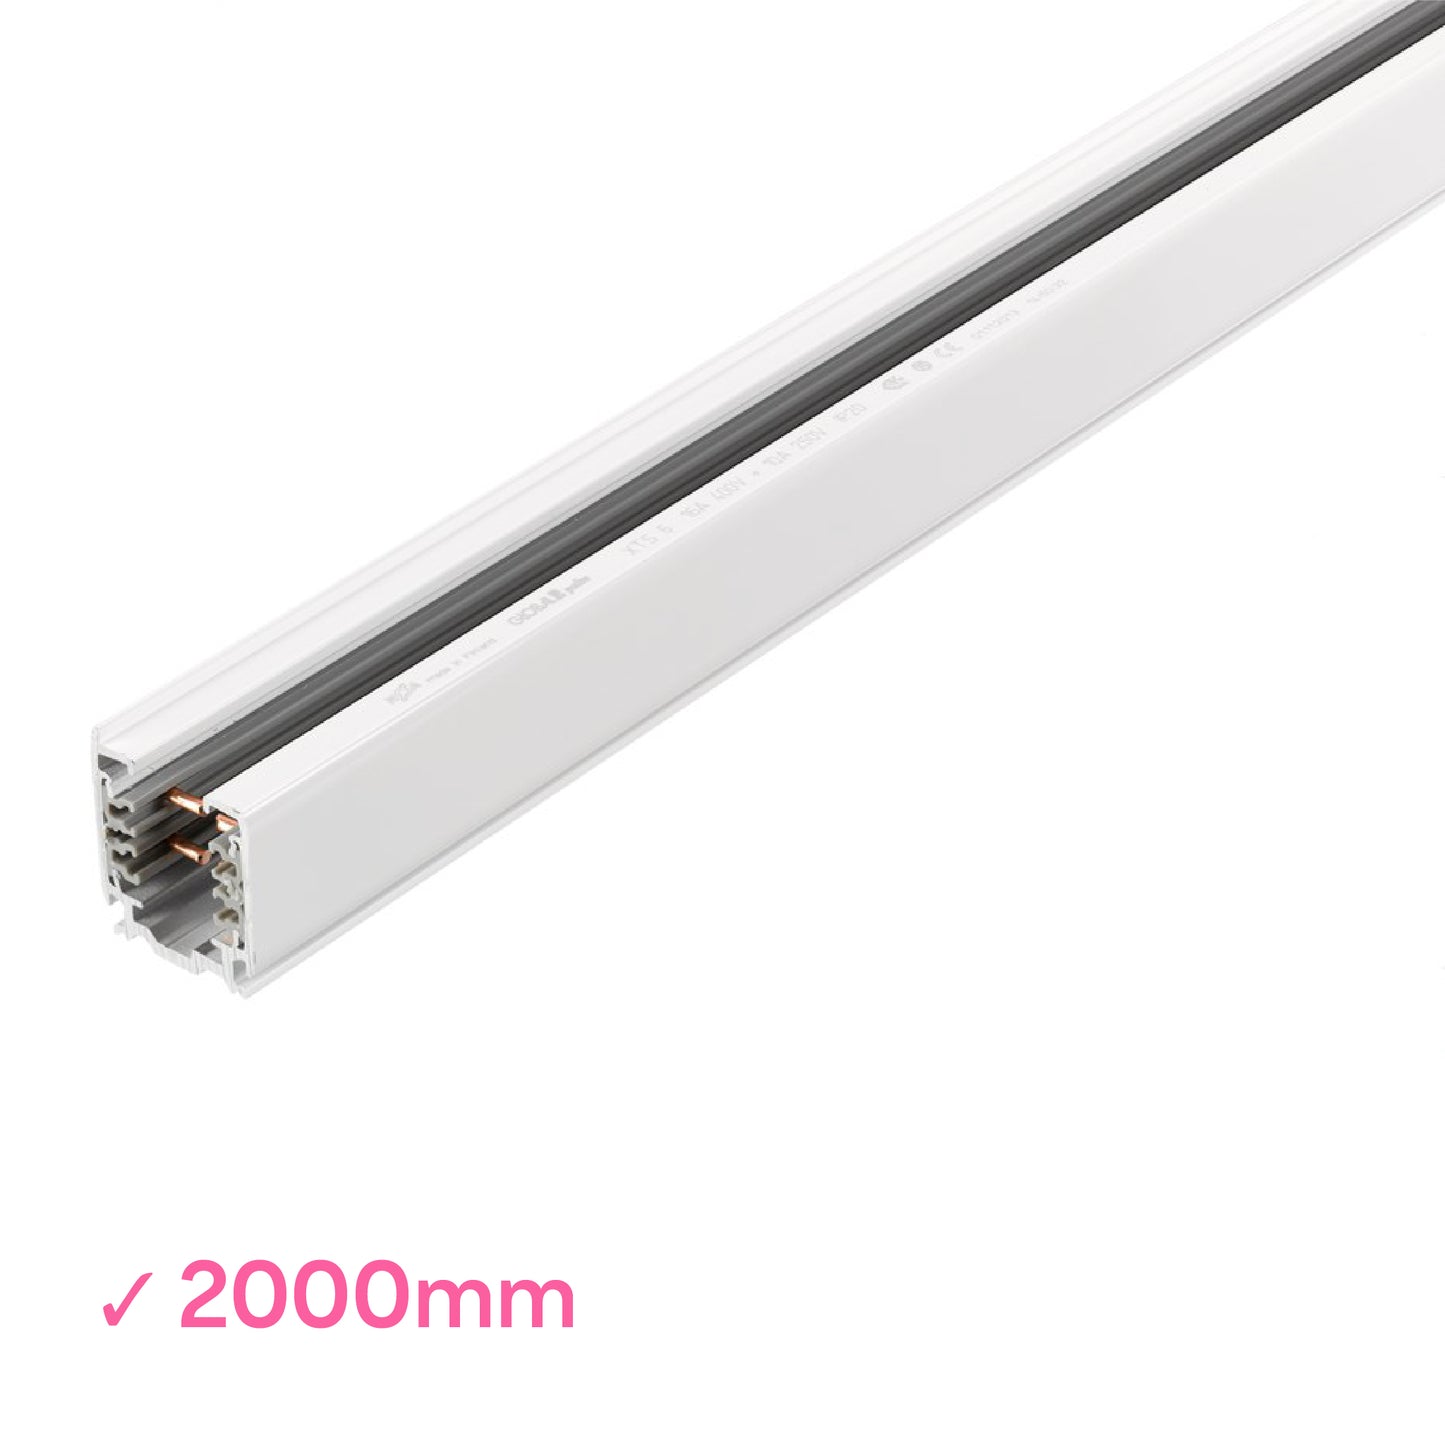 Global 2000mm or 2m white powder coated  DALI 3 Circuit Track 2 metre surface mounted track by Nordic Aluminium <XTSC6200-3>